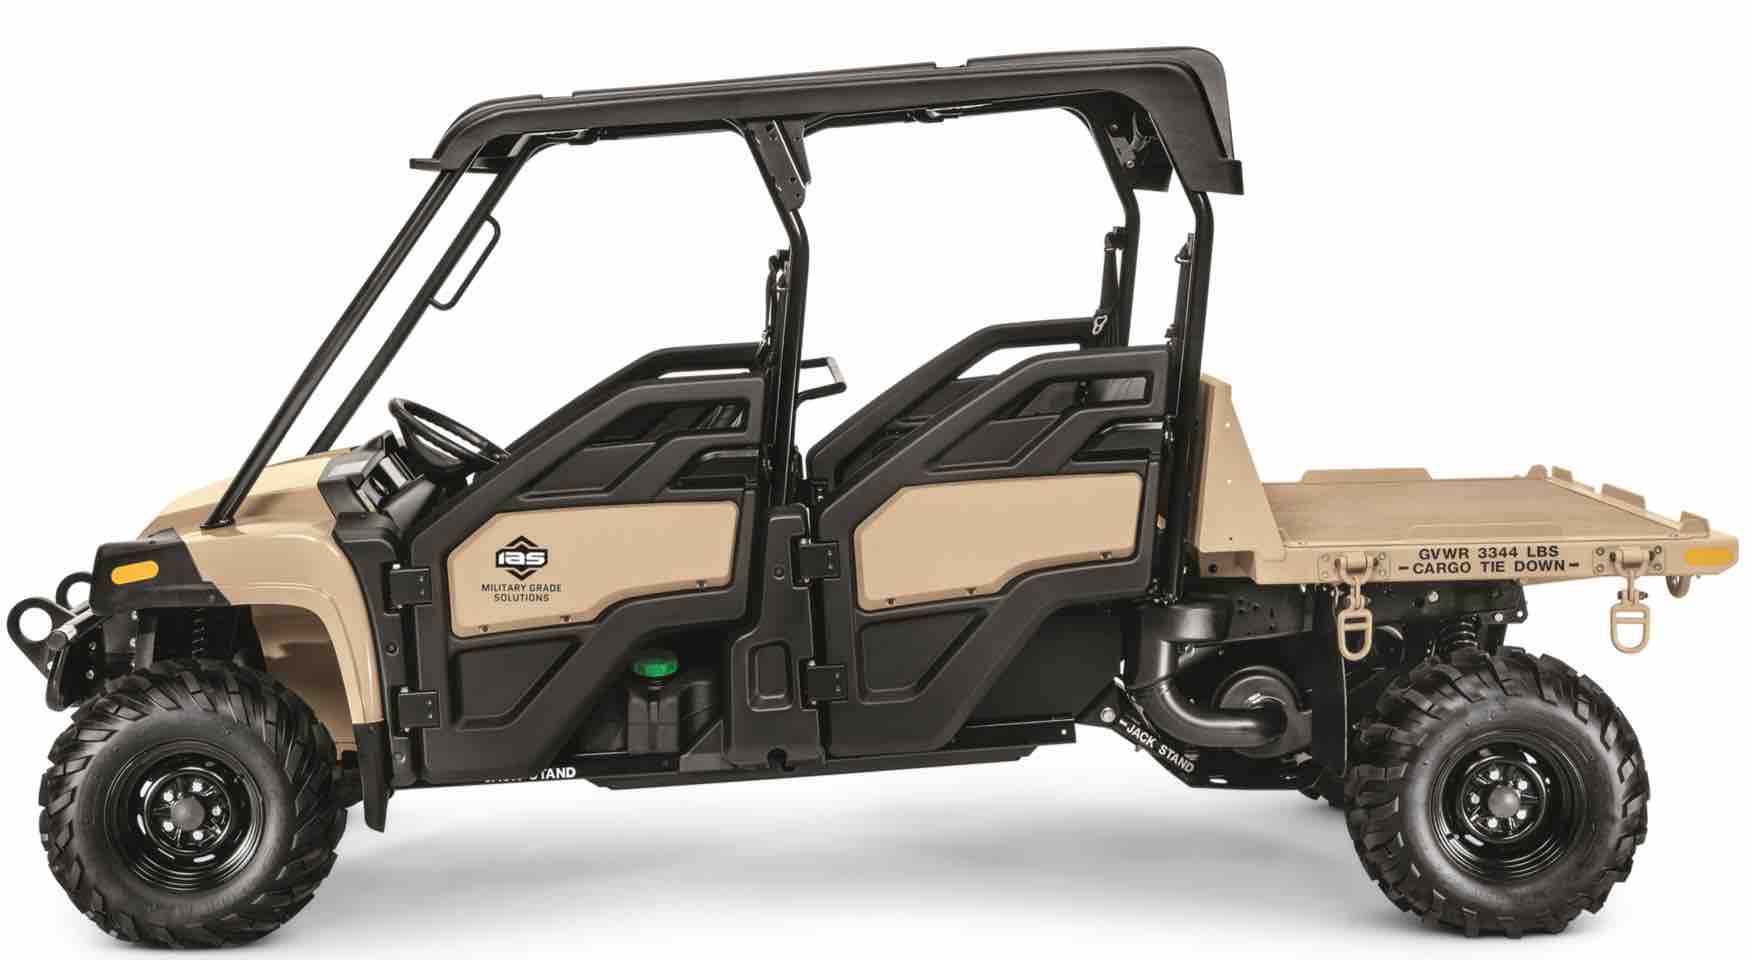 IAS MACH-1 S4 Utility Vehicle Passenger's Side View